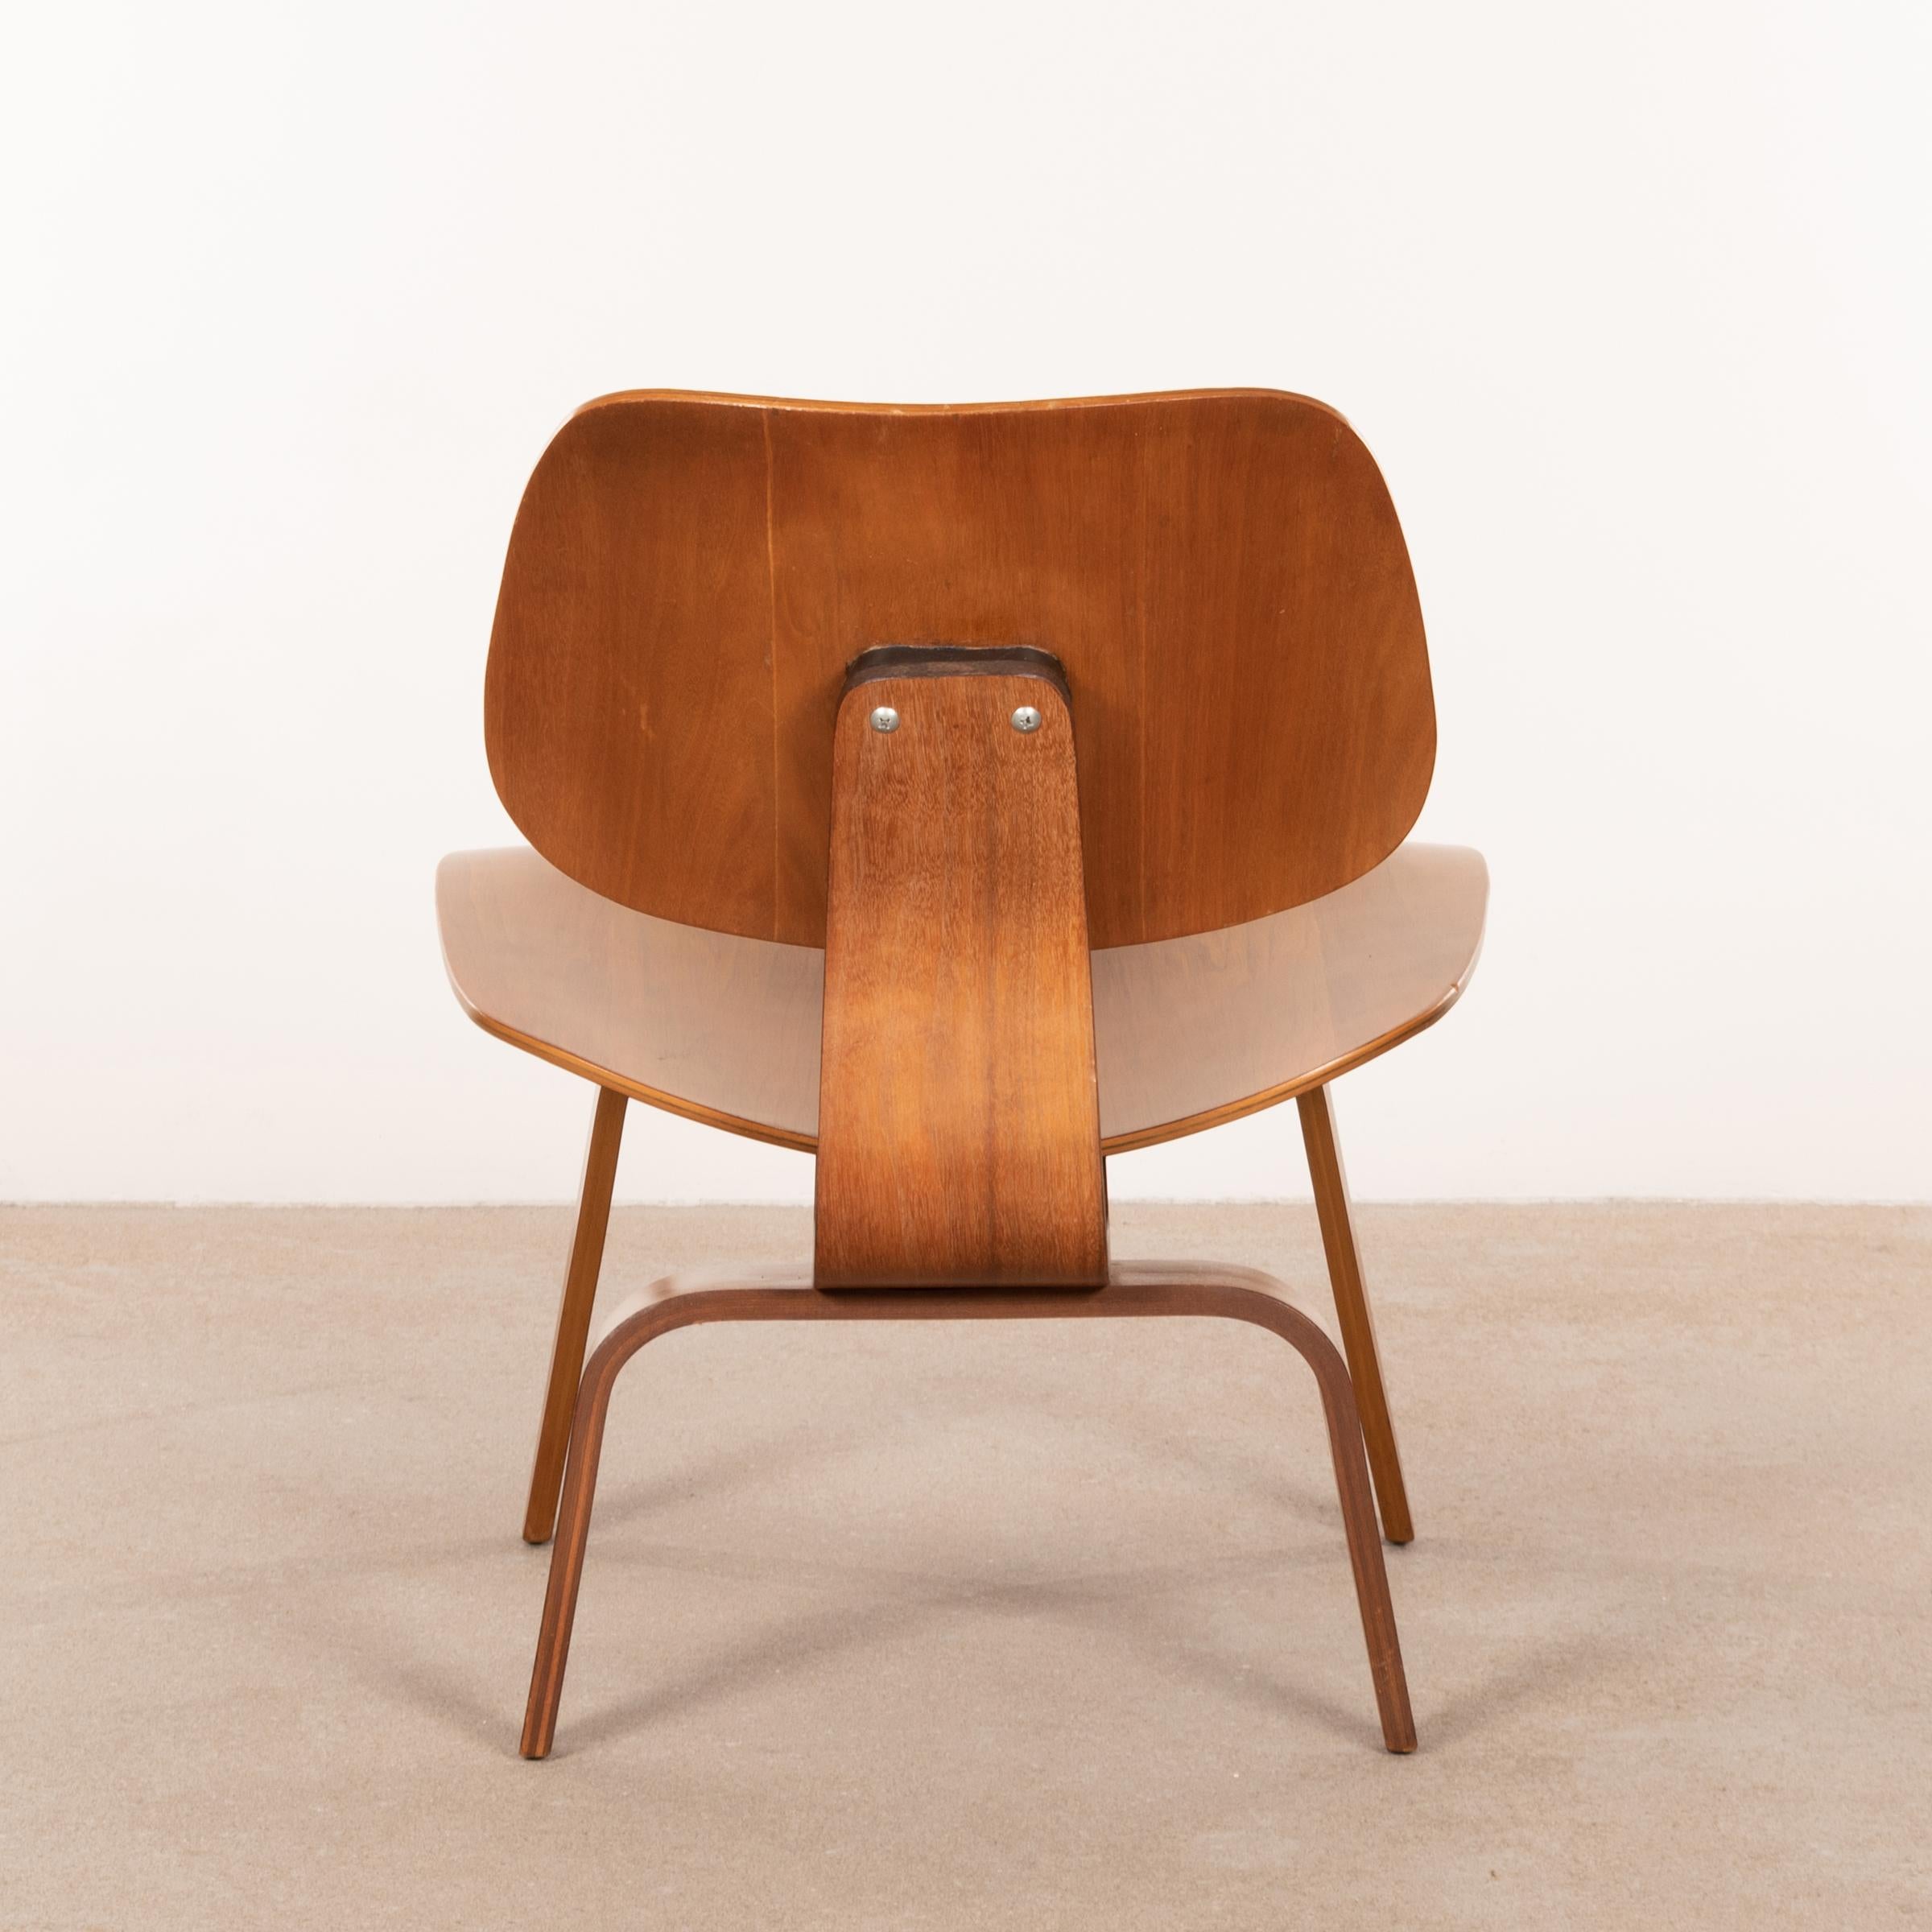 Mid-Century Modern Charles & Ray Eames Early LCW Walnut Lounge Chair for Herman Miller, 1951